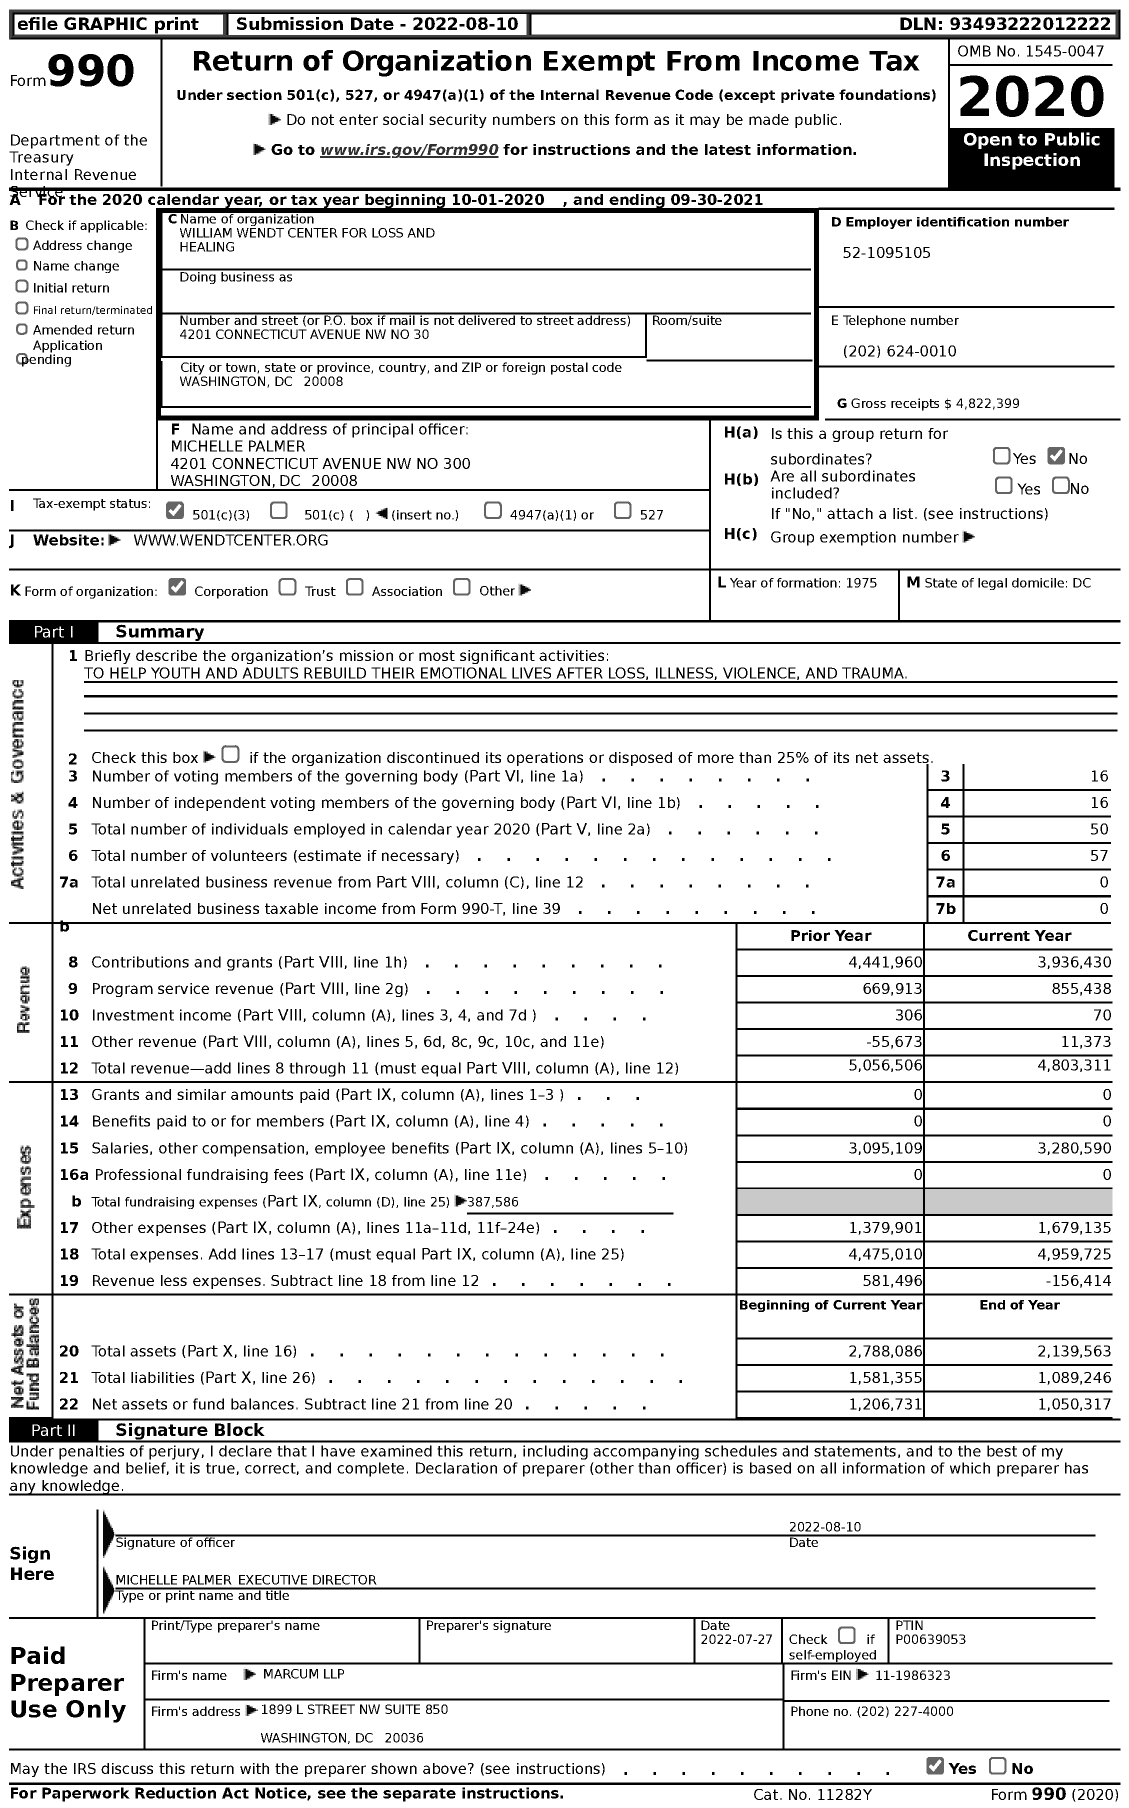 Image of first page of 2020 Form 990 for Wendt Center for Loss and Healing